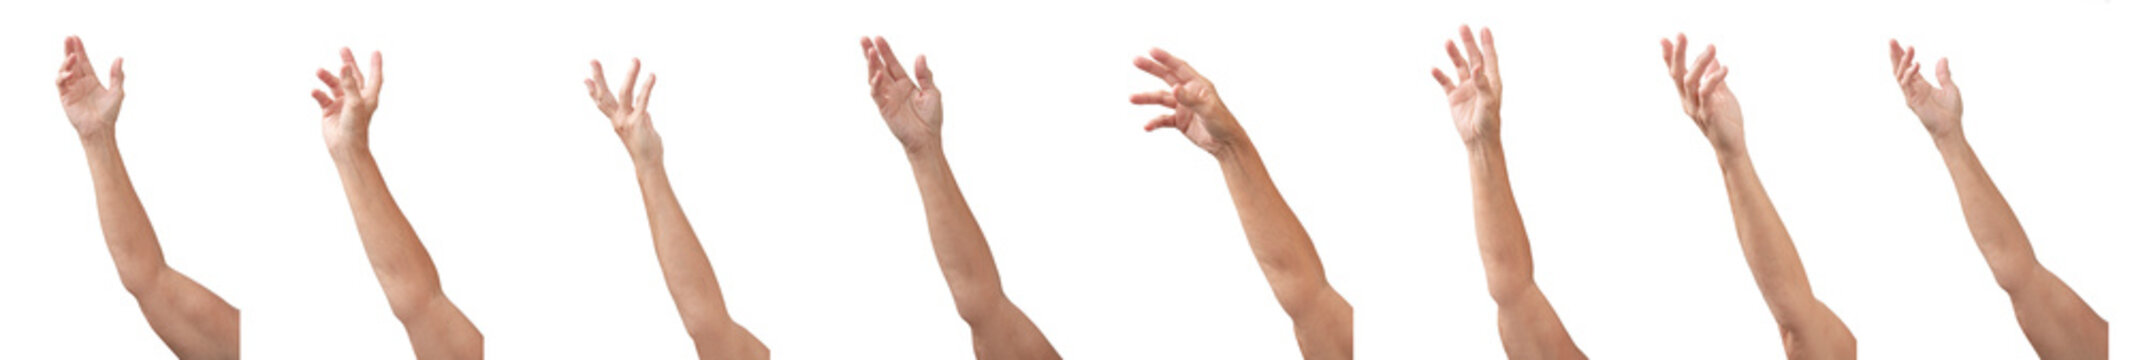 Eight different views of a lady's hand and arm throwing, catching, waving, etc.  Isolated on white for easy extraction.